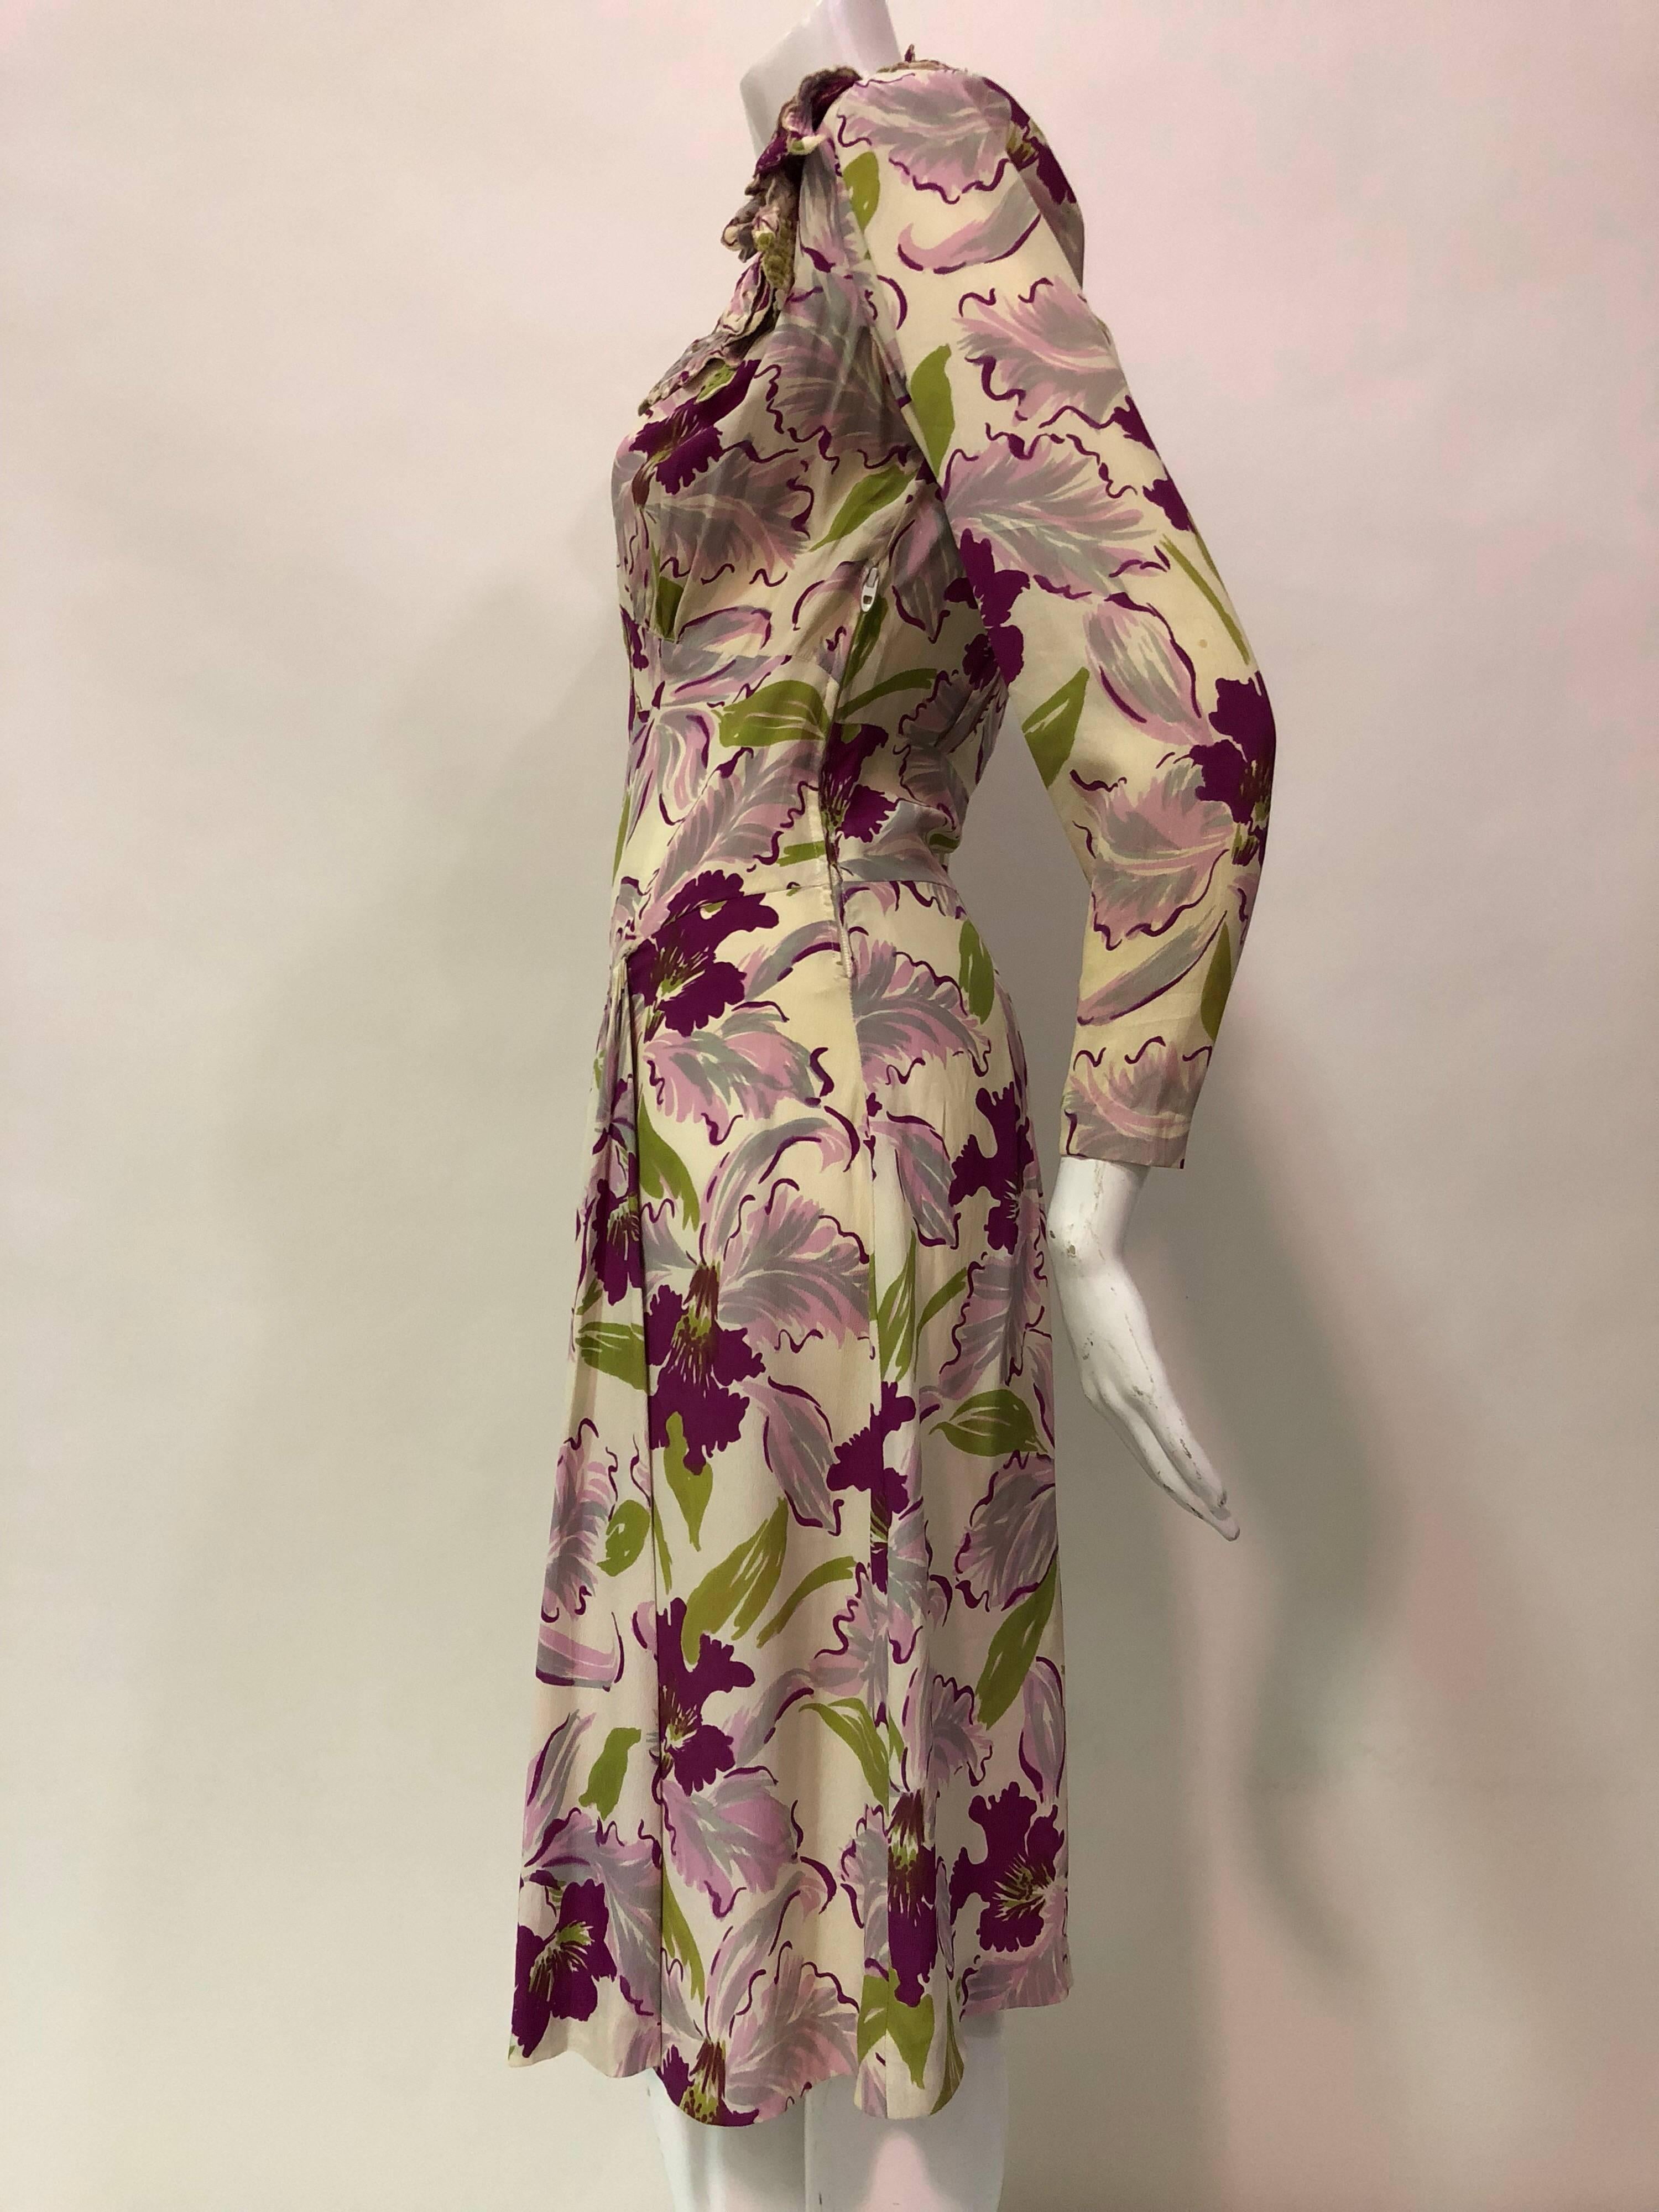 1940s Orchid Print Rayon Crepe Dress W/ Dramatic Orchid Corsage In Excellent Condition For Sale In Gresham, OR